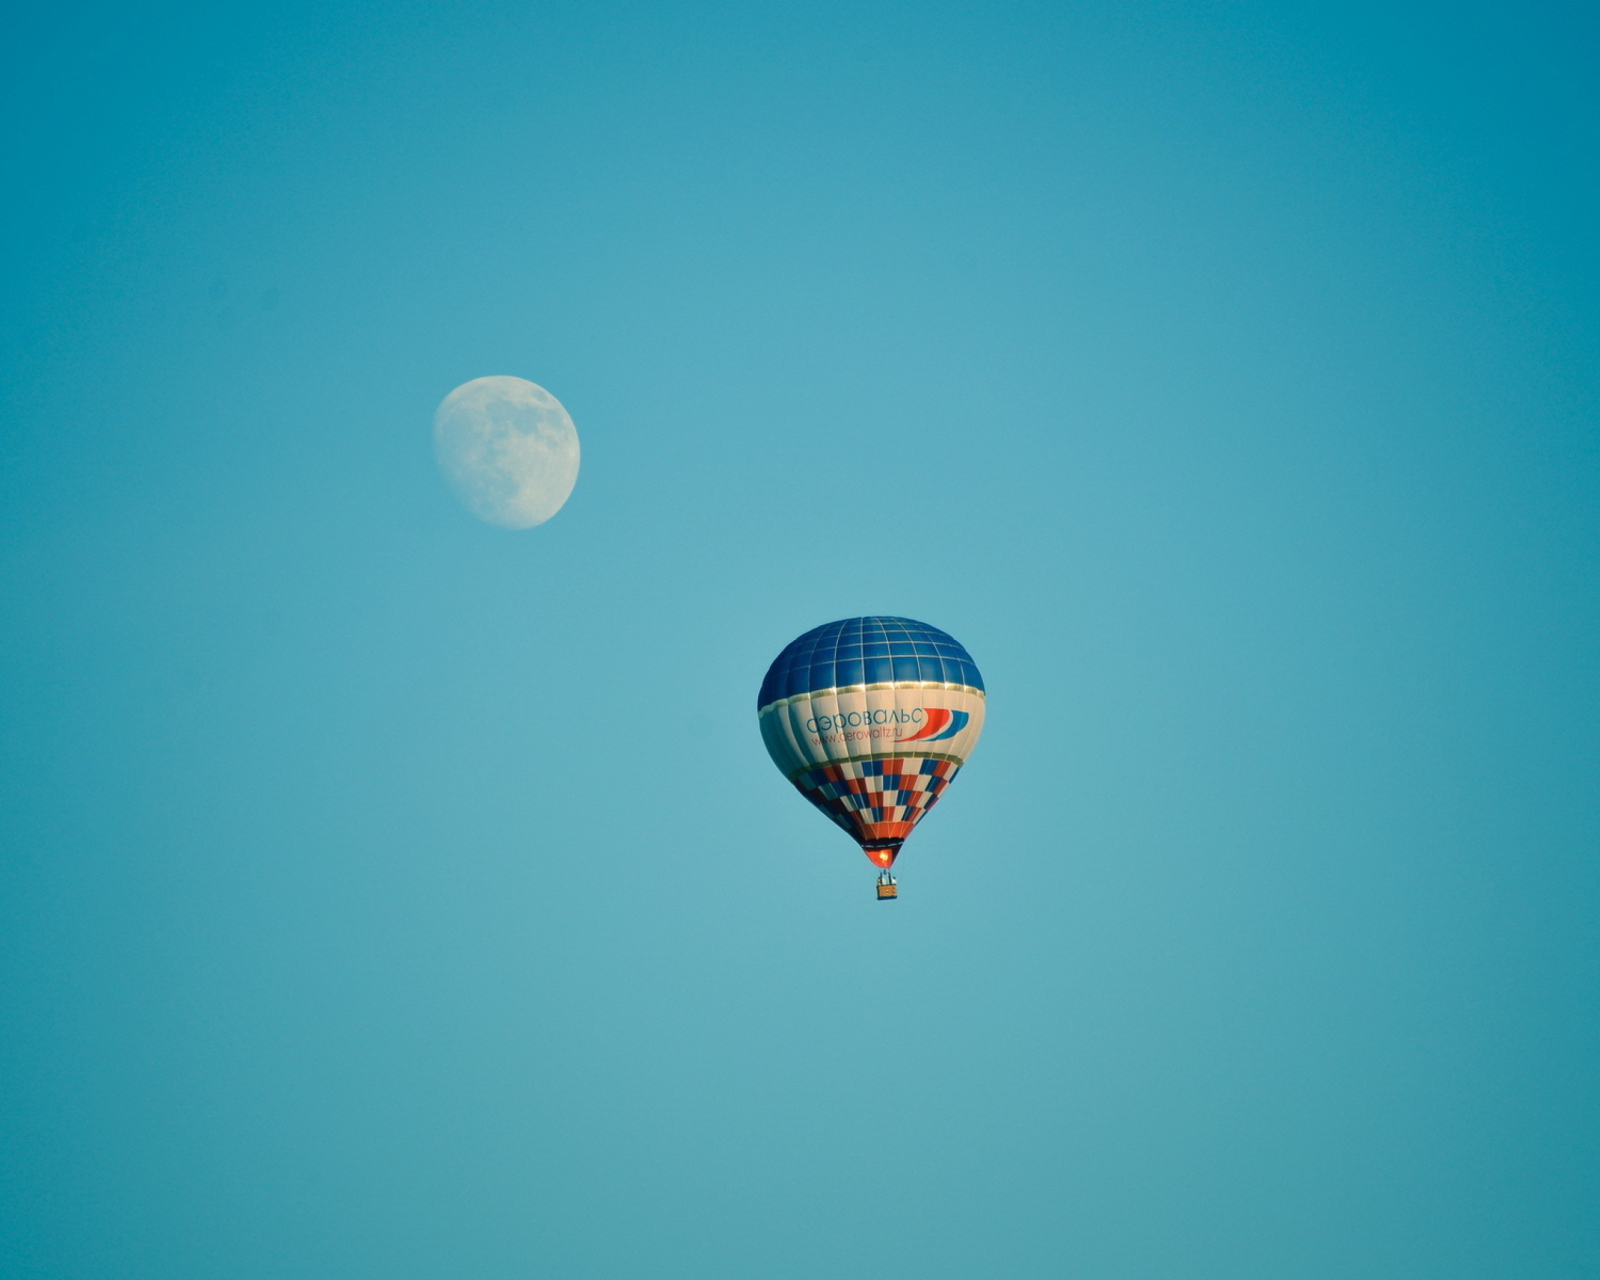 Das Air Balloon In Blue Sky In Front Of White Moon Wallpaper 1600x1280